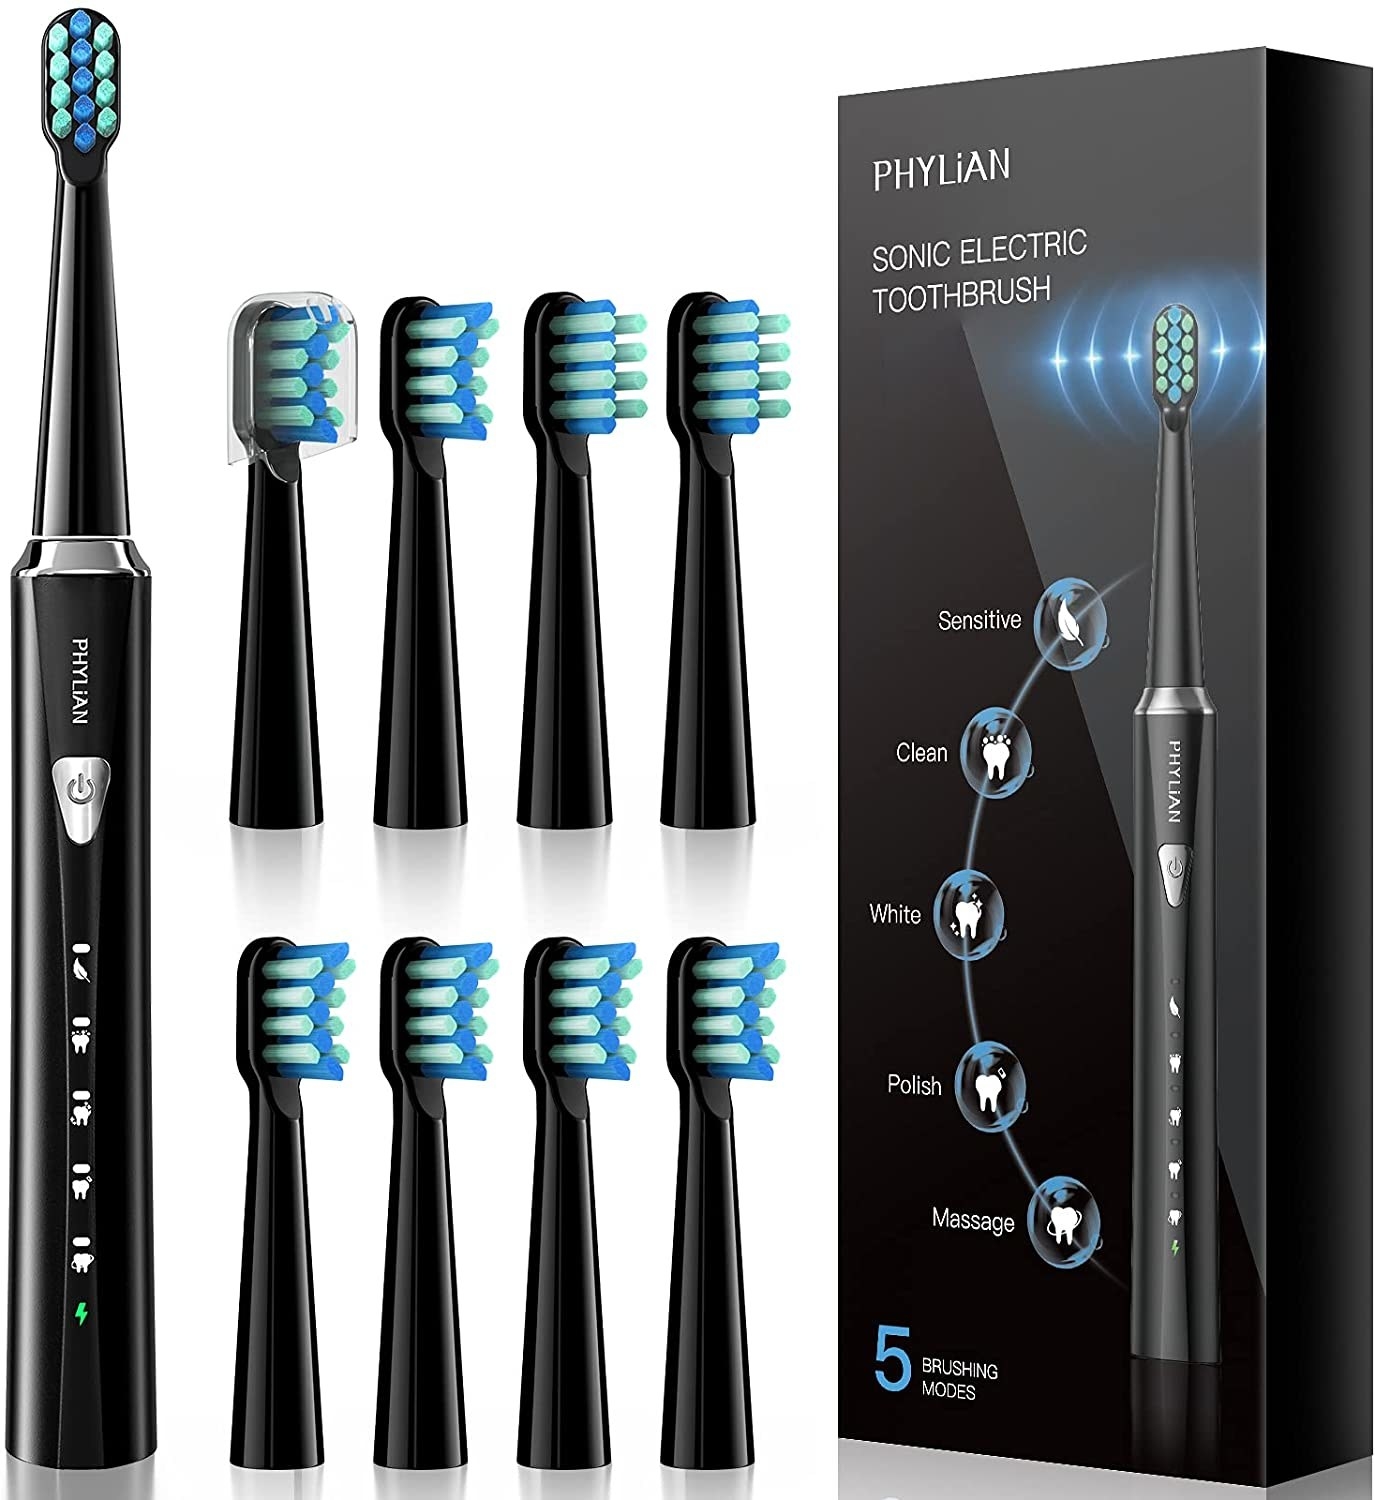 The electric toothbrush in black and the eight toothbrush heads